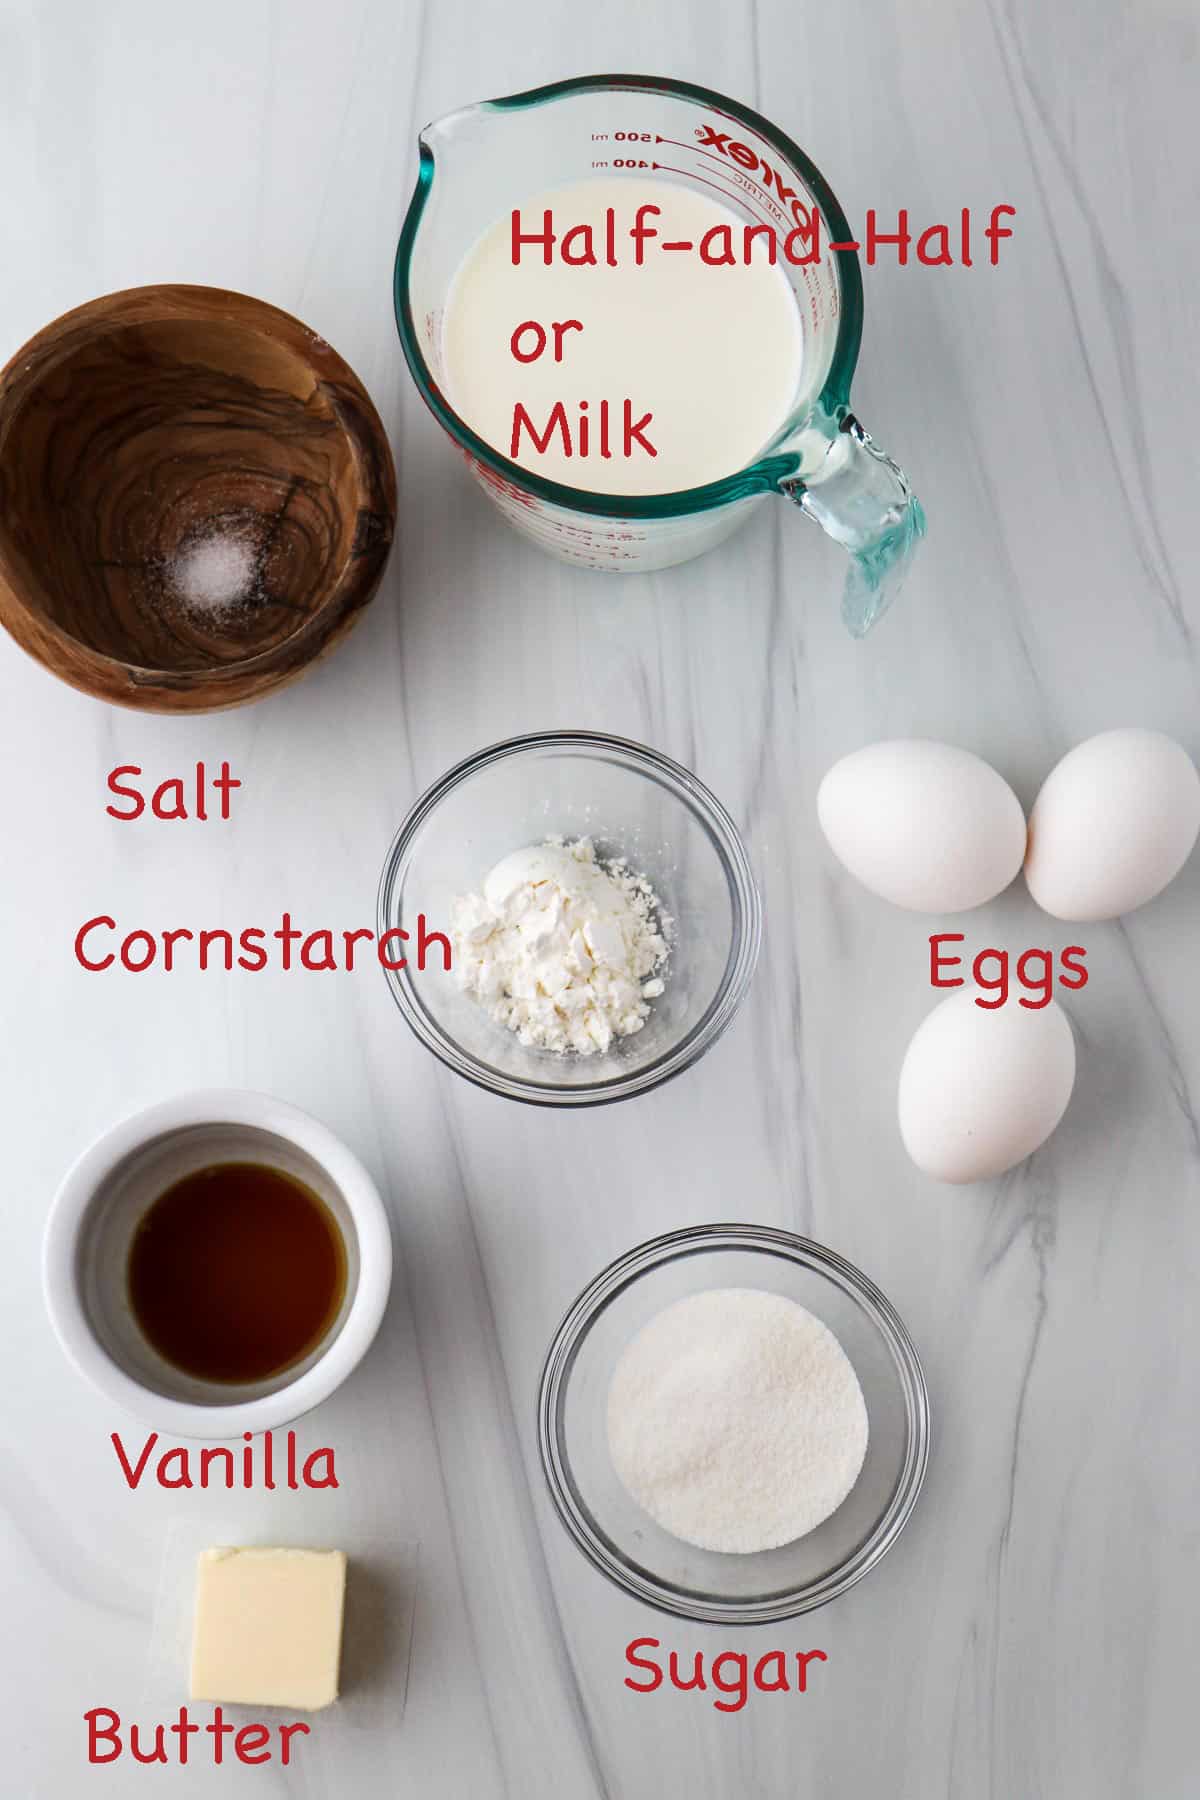 Labeled ingredients for pastry cream.